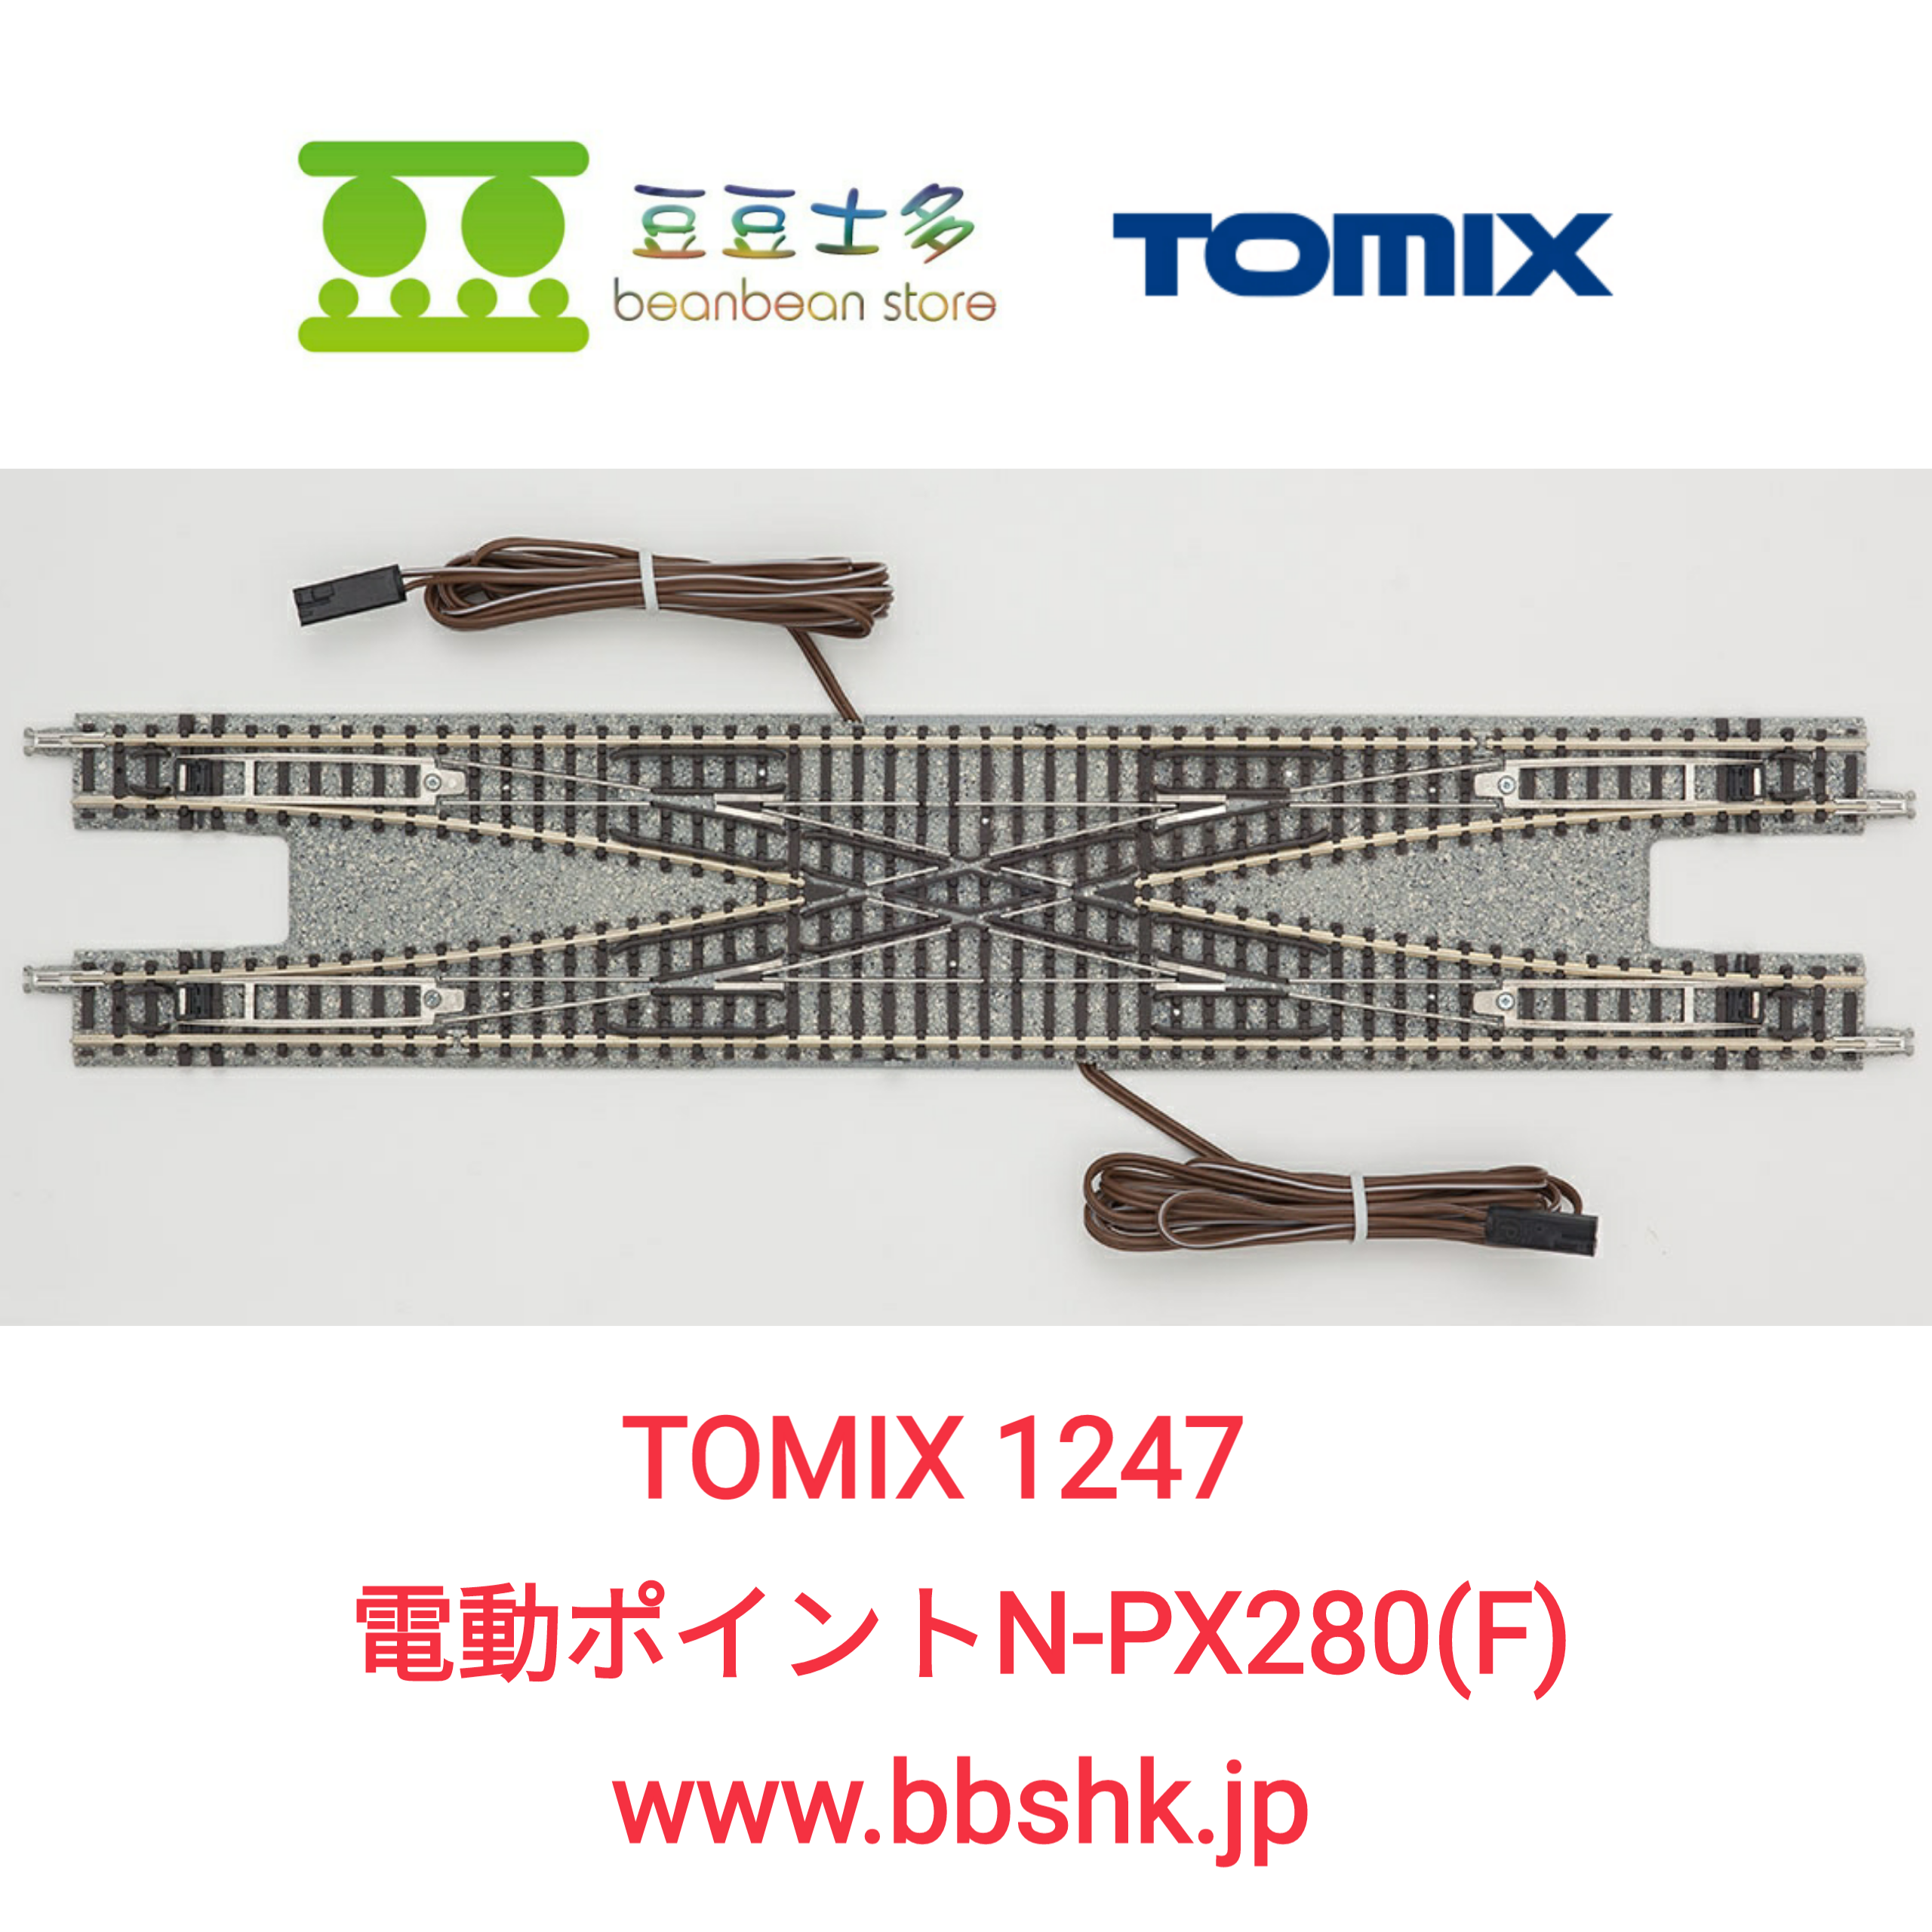 TOMIX 1247 Fine Track N-PX280 (F) 電動波口